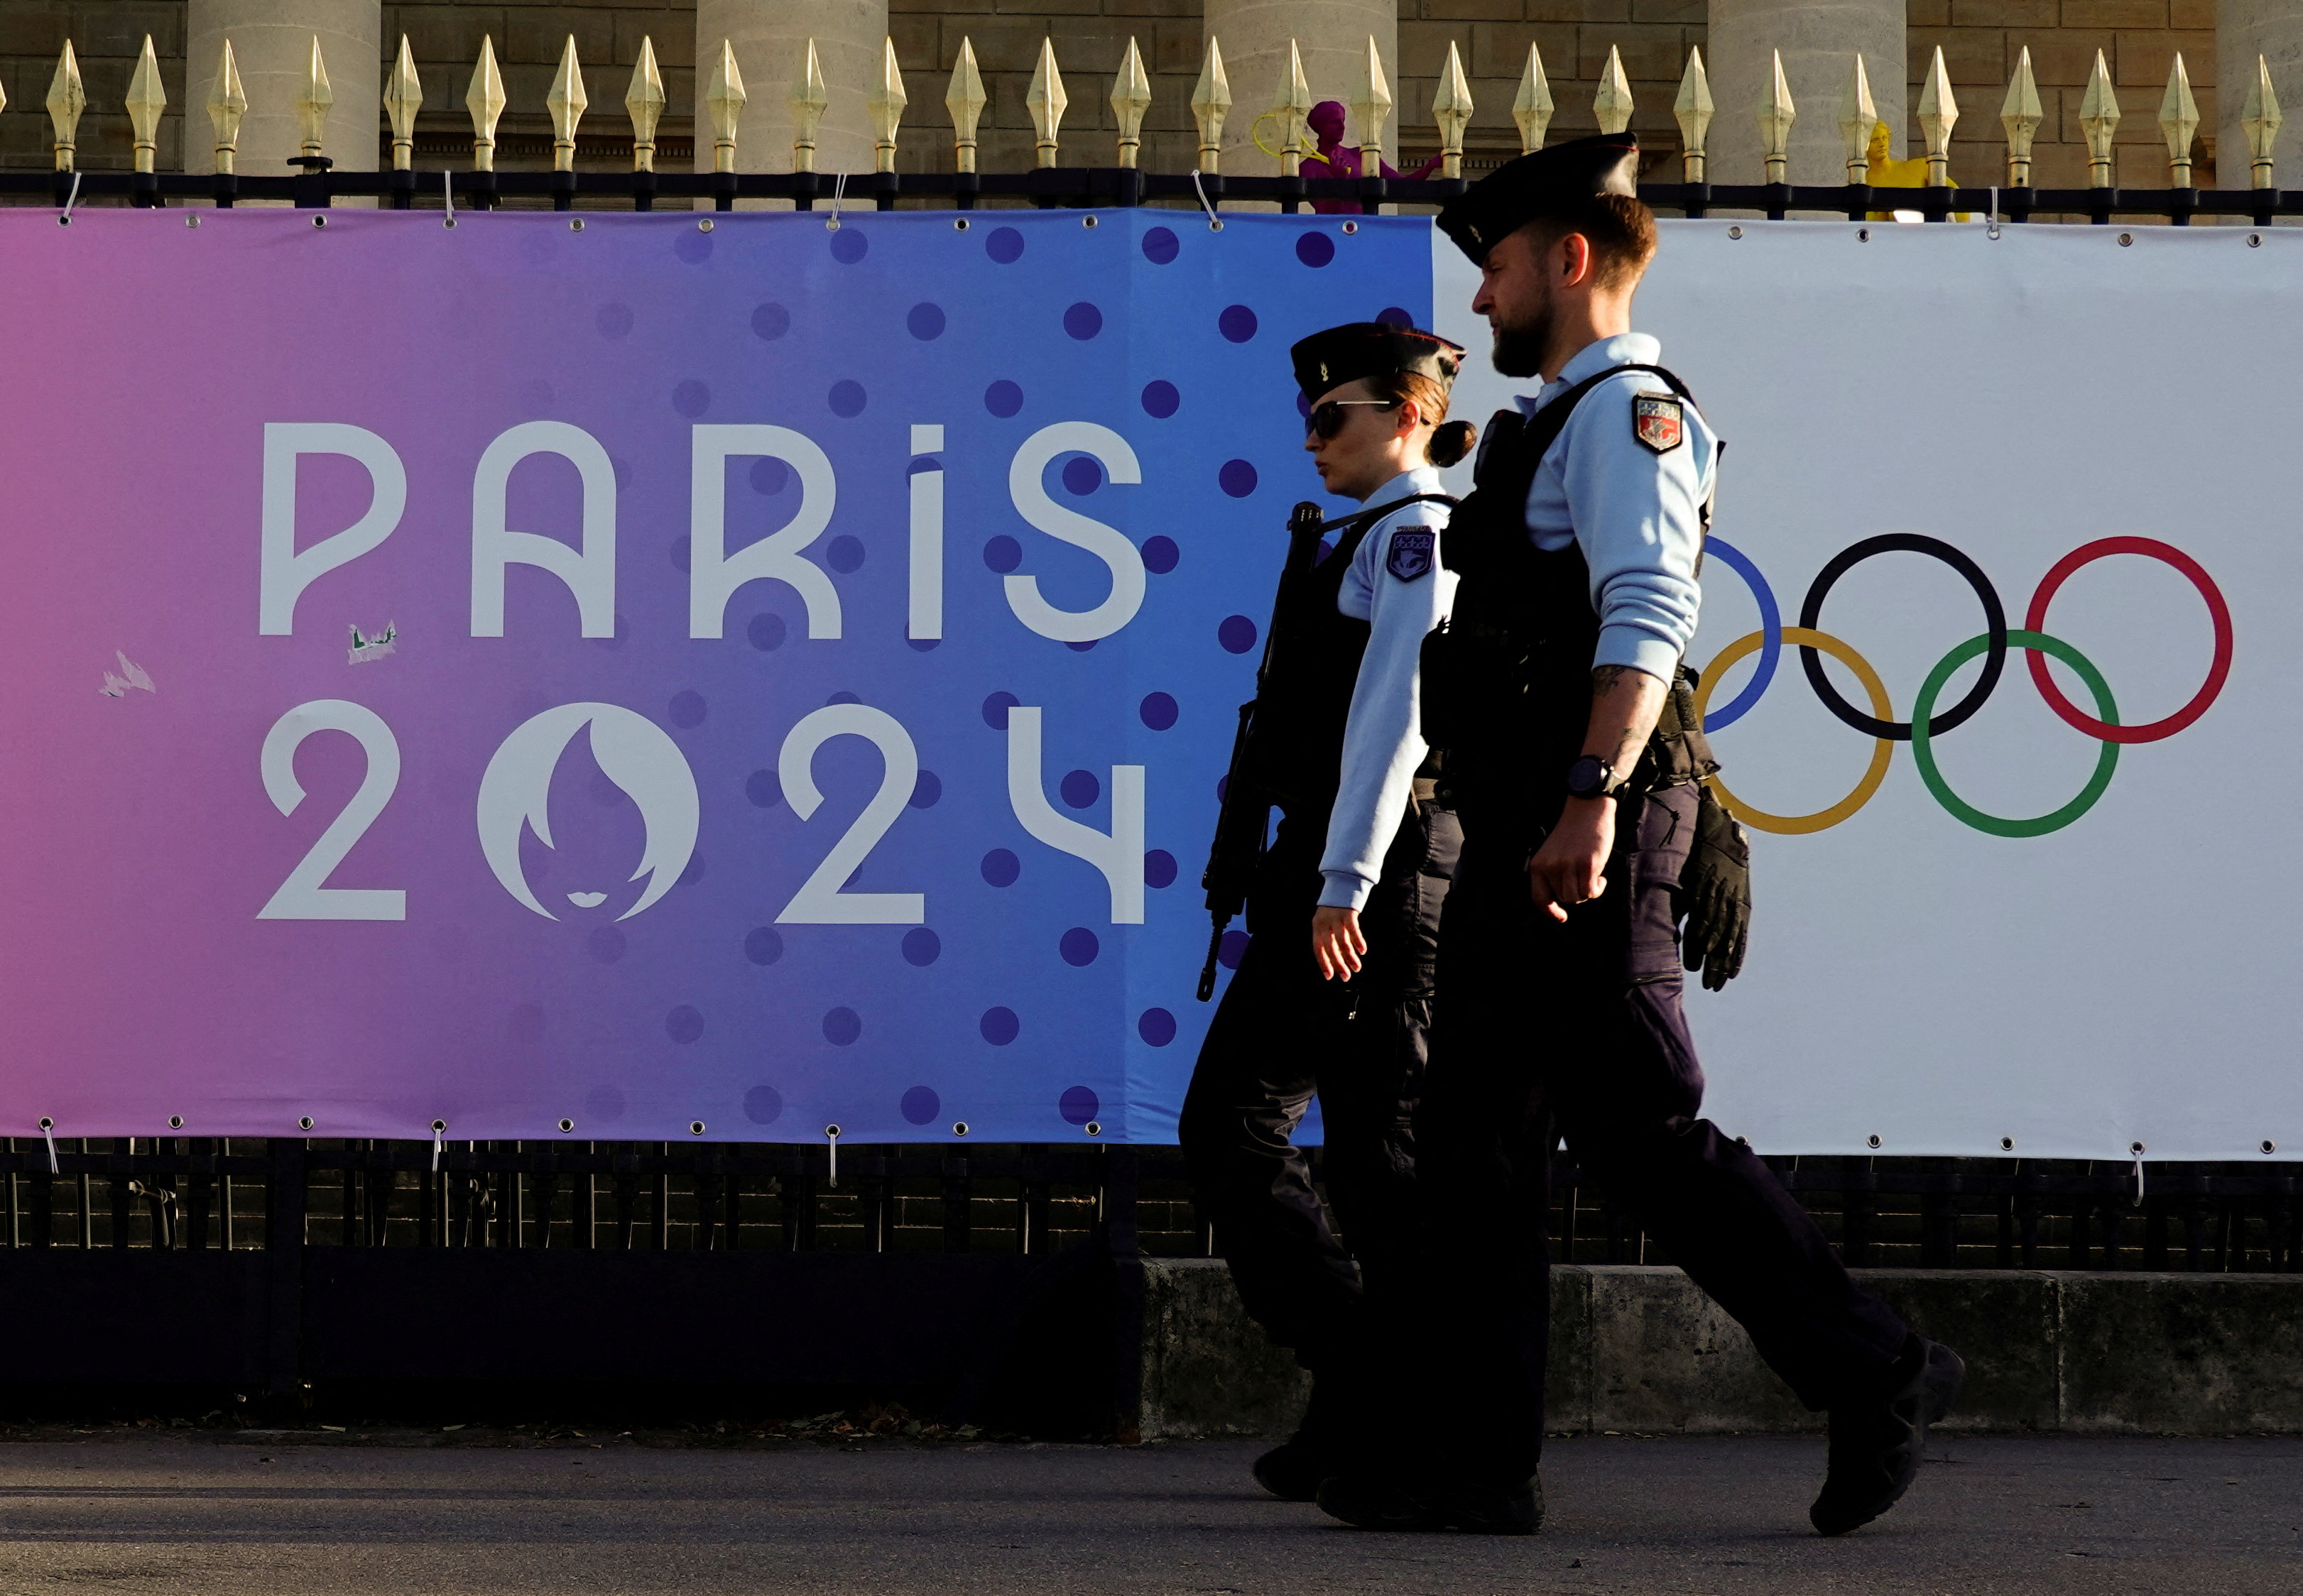 French gendarmes patrol a street near a poster advertising the Paris 2024 Summer Games in Paris